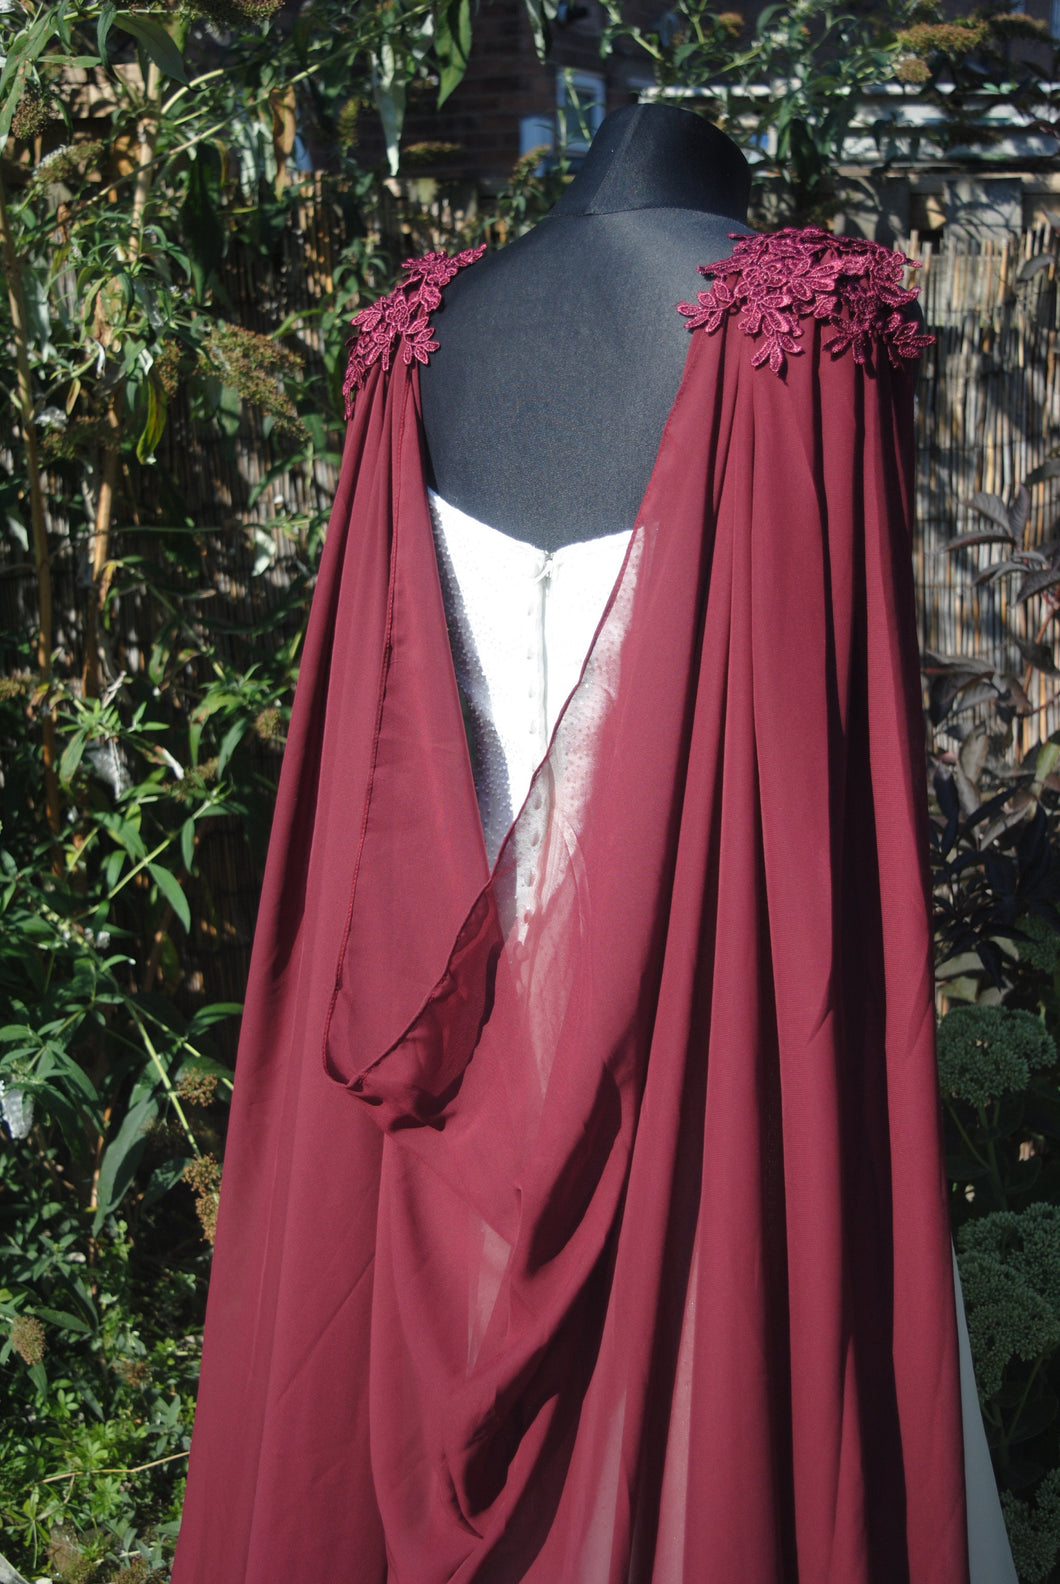 Chiffon Bridal Cloak with Lace - Red, Black, White,  Ivory, Champagne